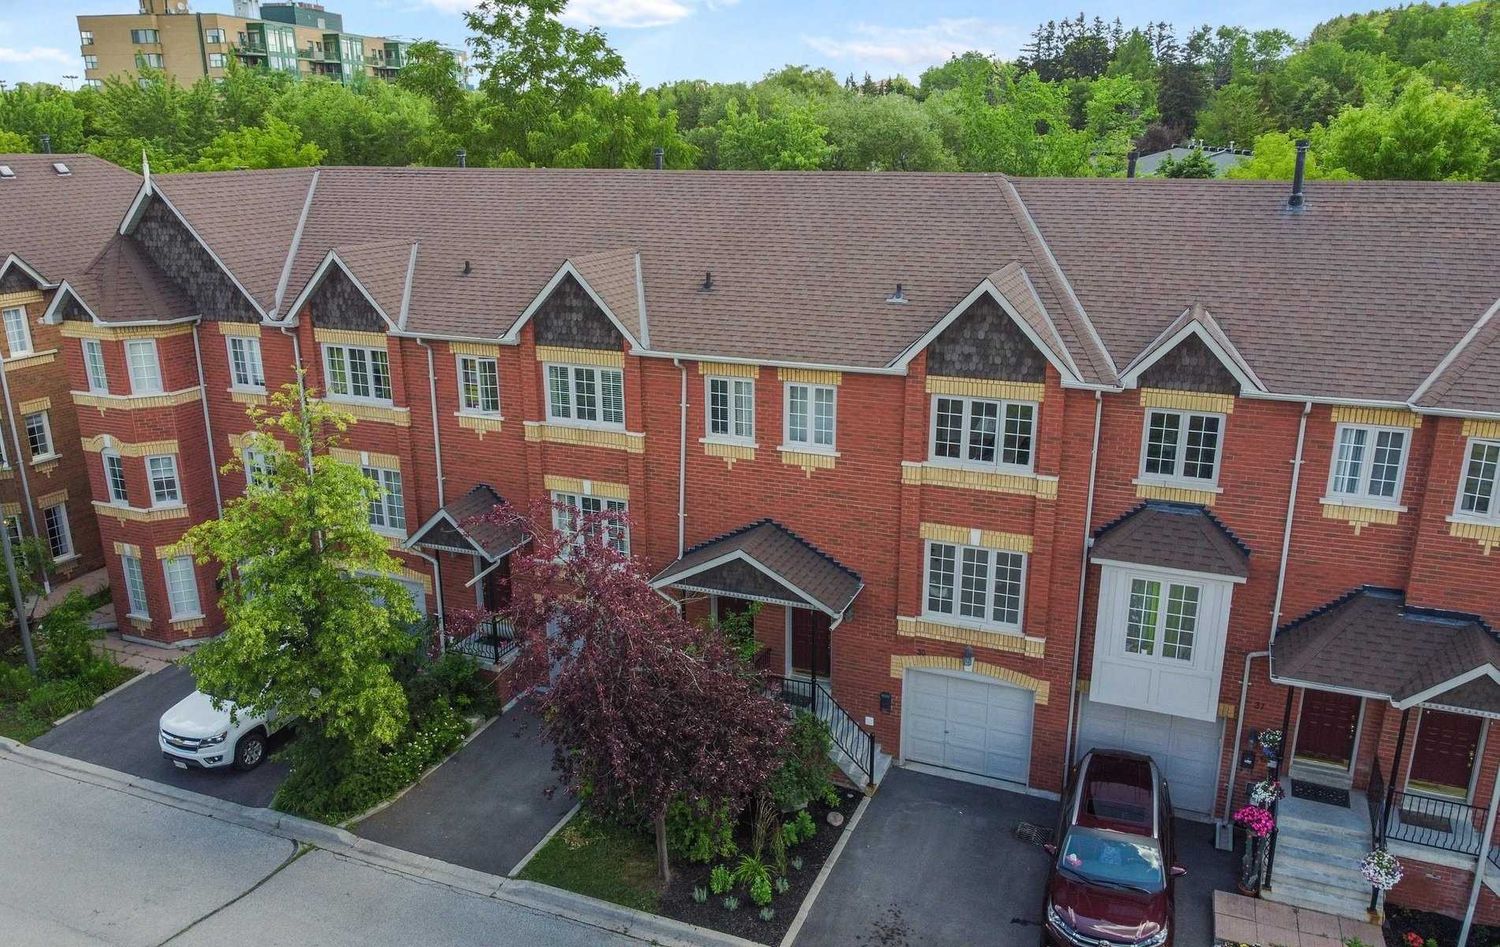 95 Weldrick Road E. Observatory Gate Townhomes is located in  Richmond Hill, Toronto - image #3 of 3